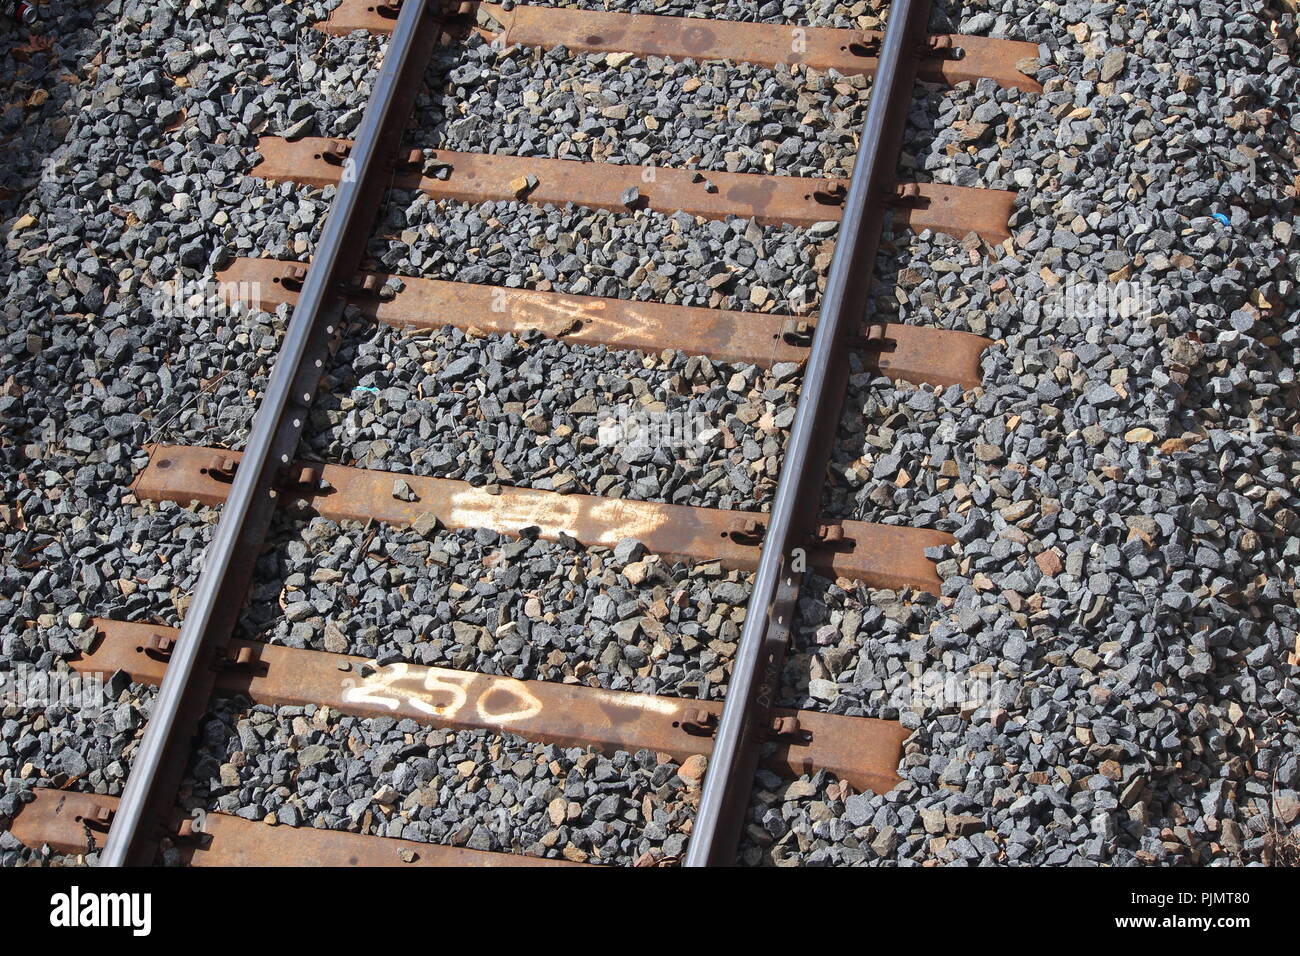 Railway track, sleepers and ties on a sunny day in NSW, Australia. Stock Photo